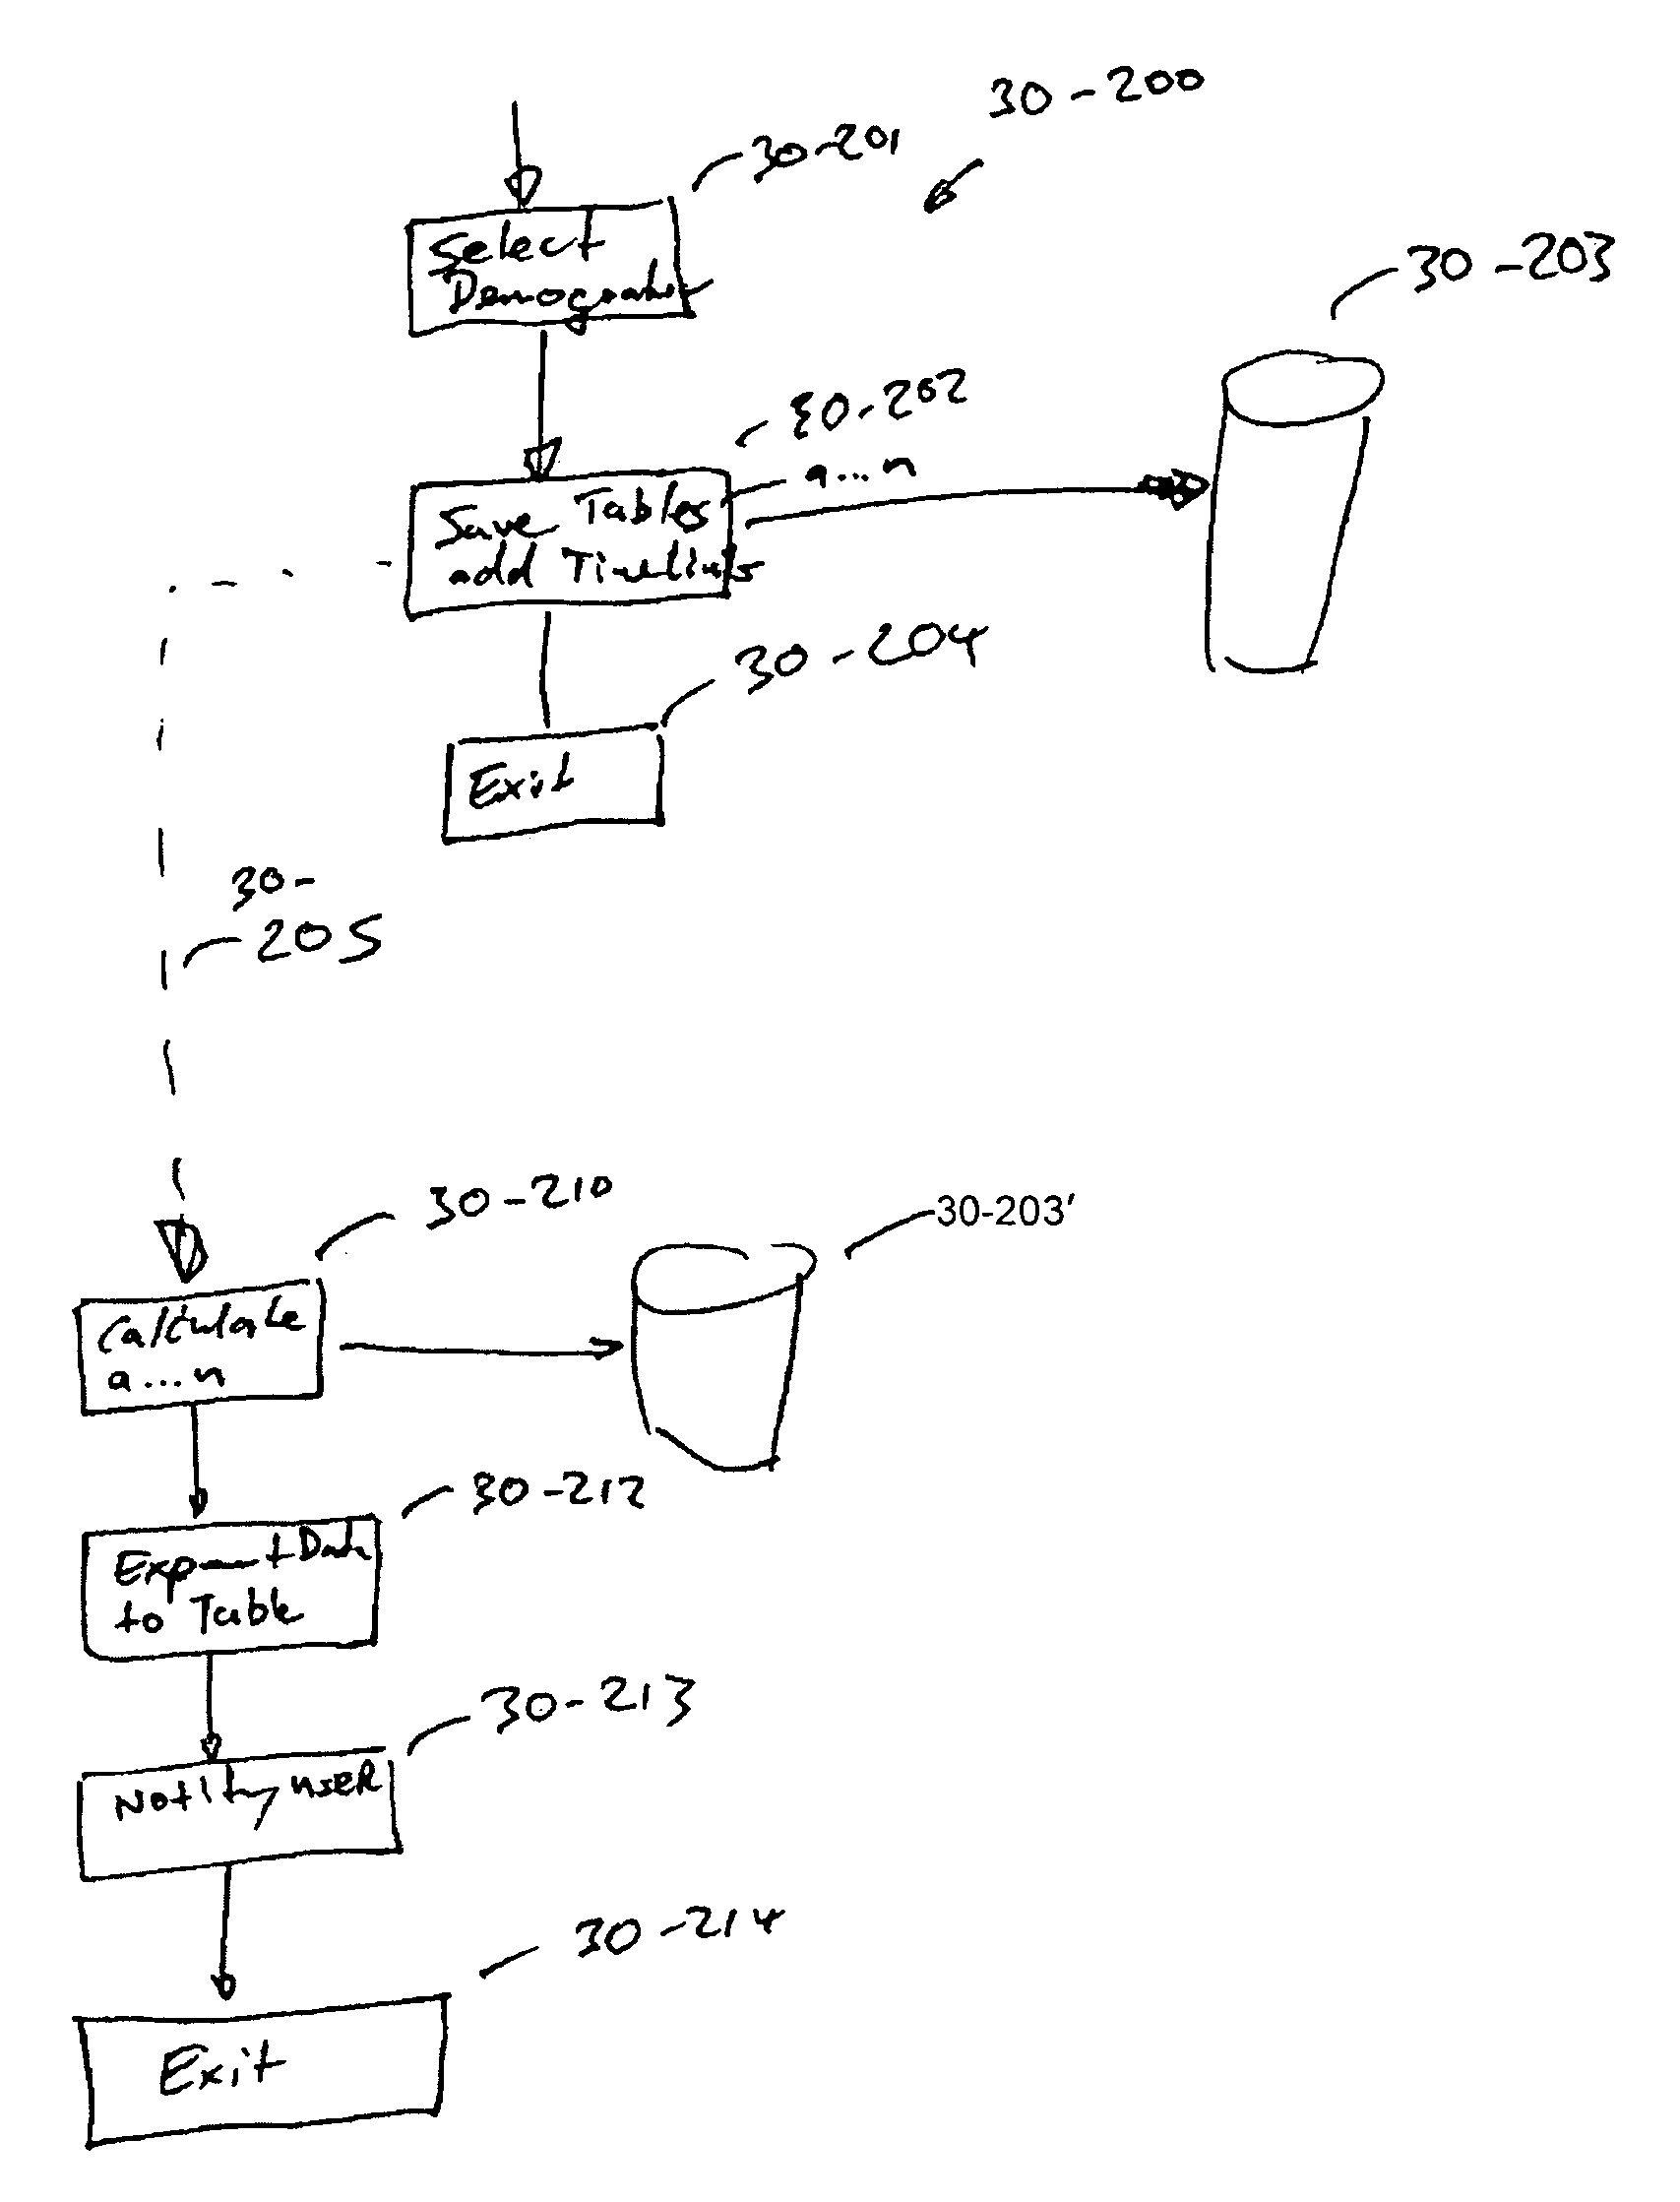 Method and system for testing of policies to determine cost savings